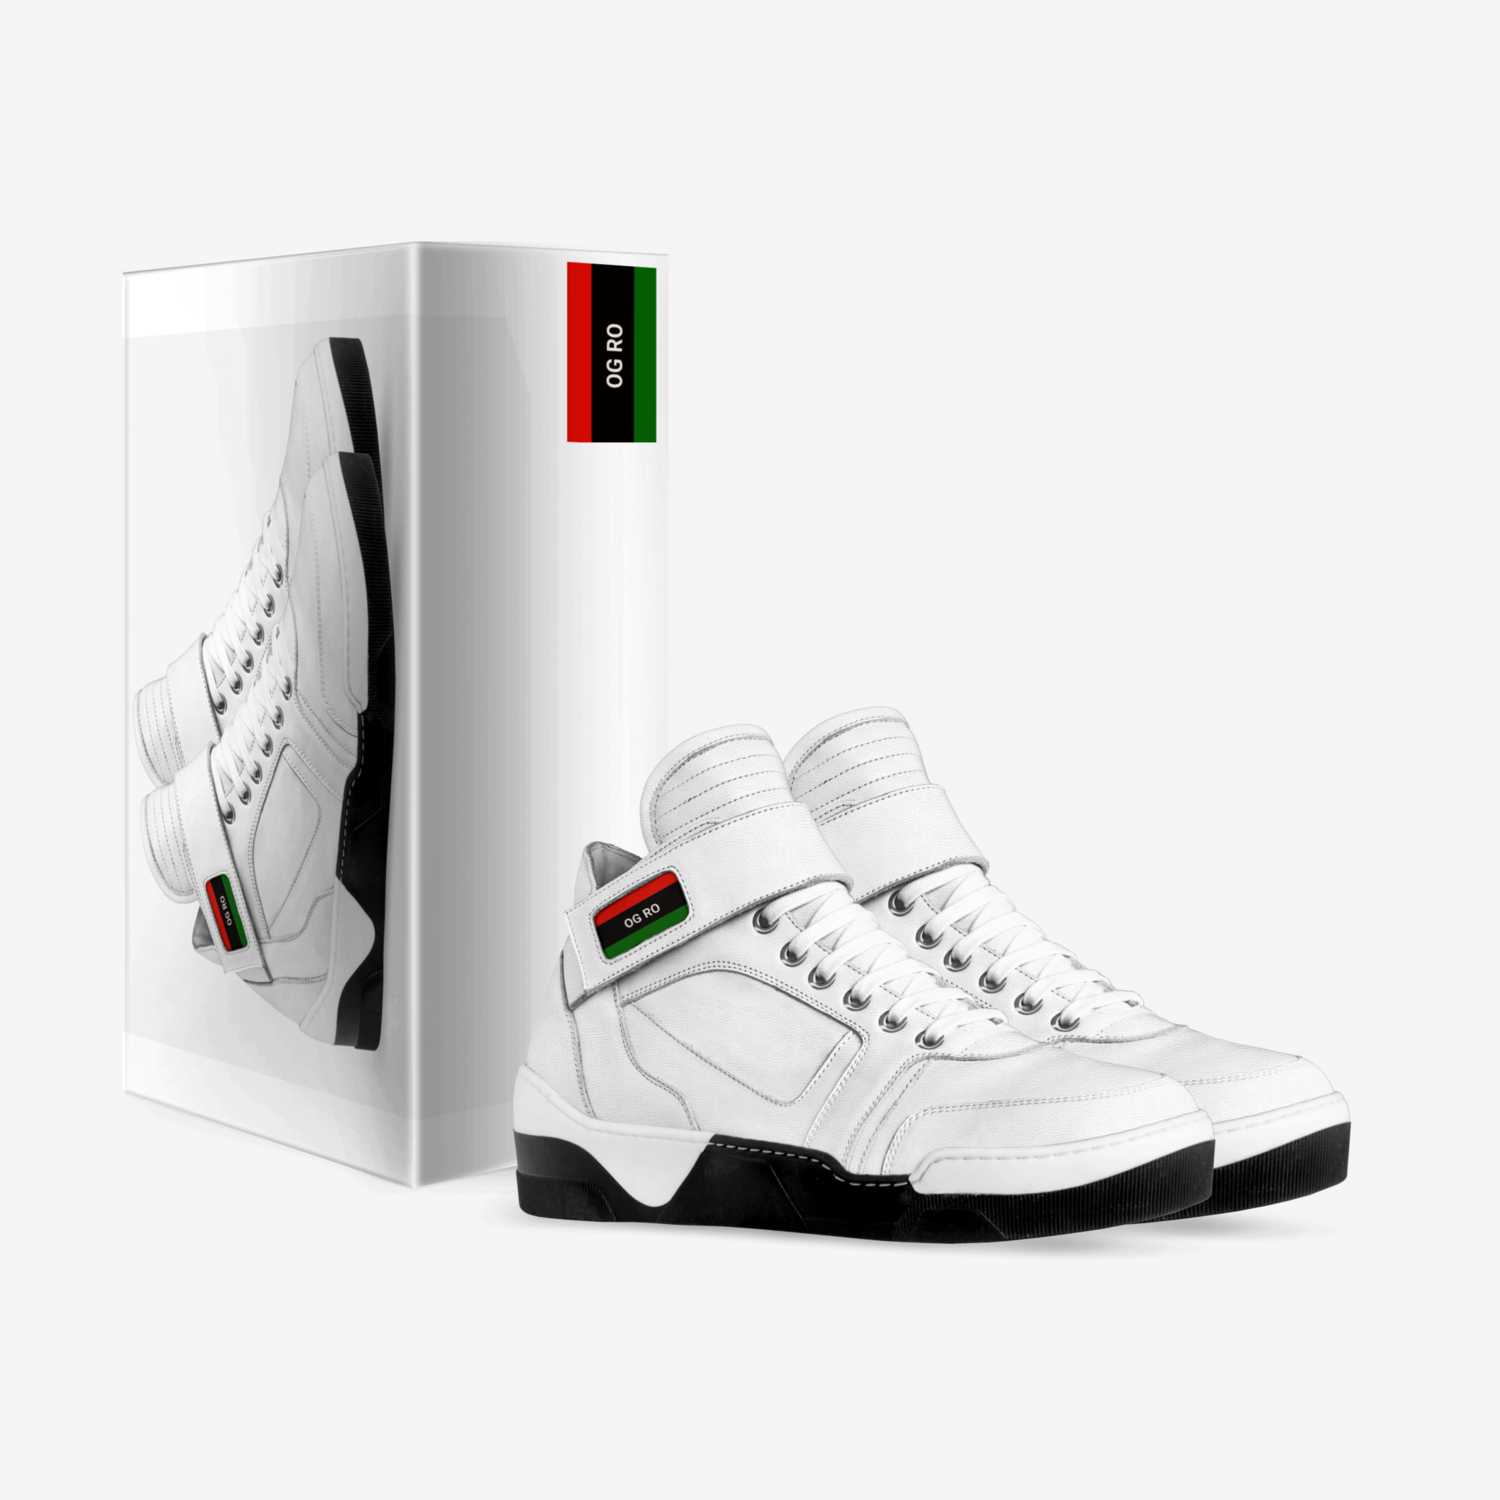 OG RO  custom made in Italy shoes by El Ro Al | Box view